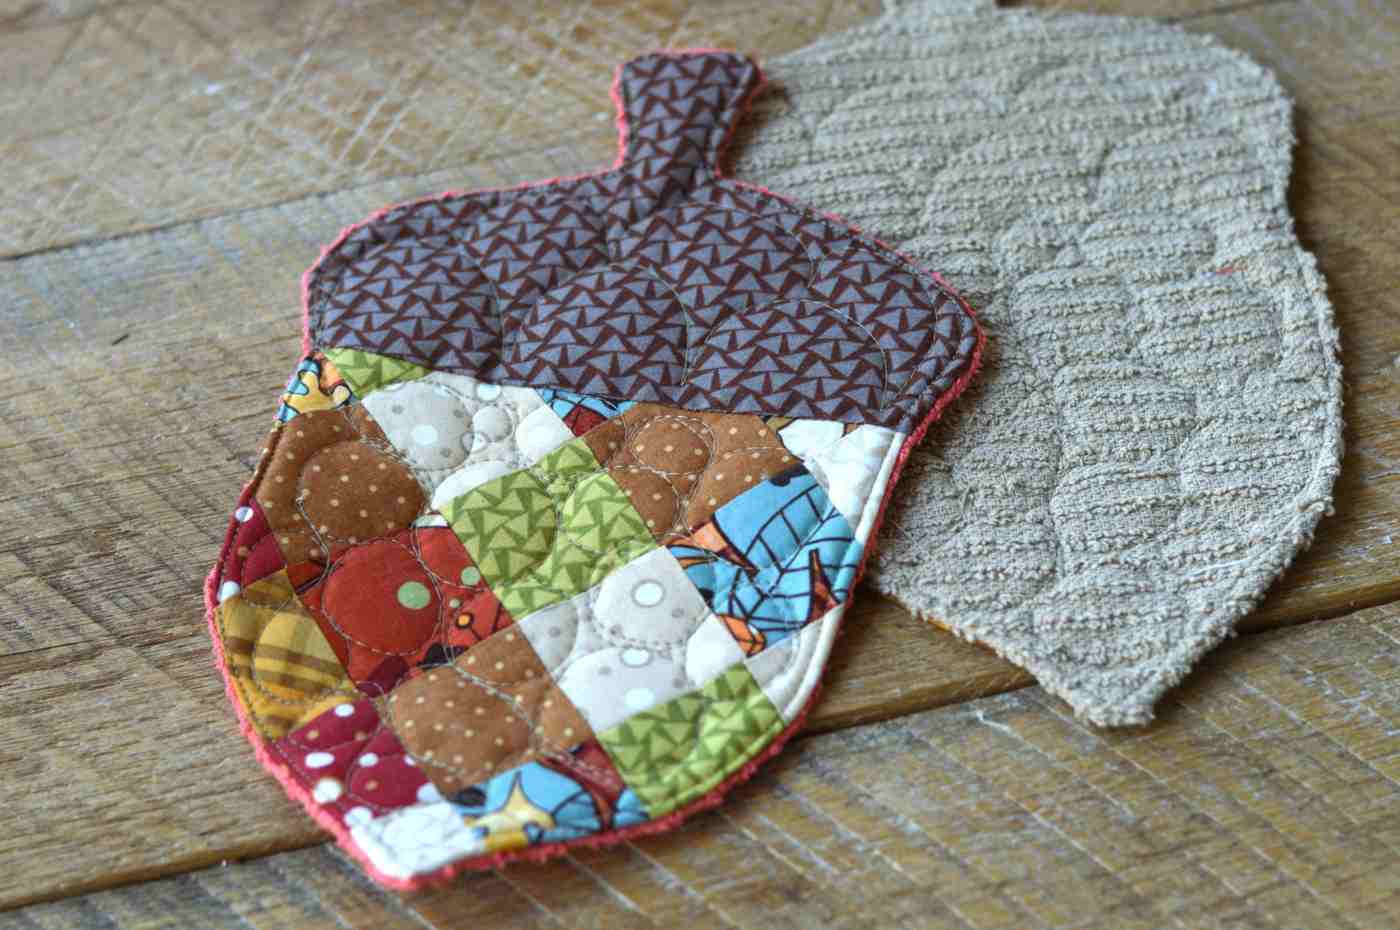 Use fabric in hearty colors and patterns for sewing projects